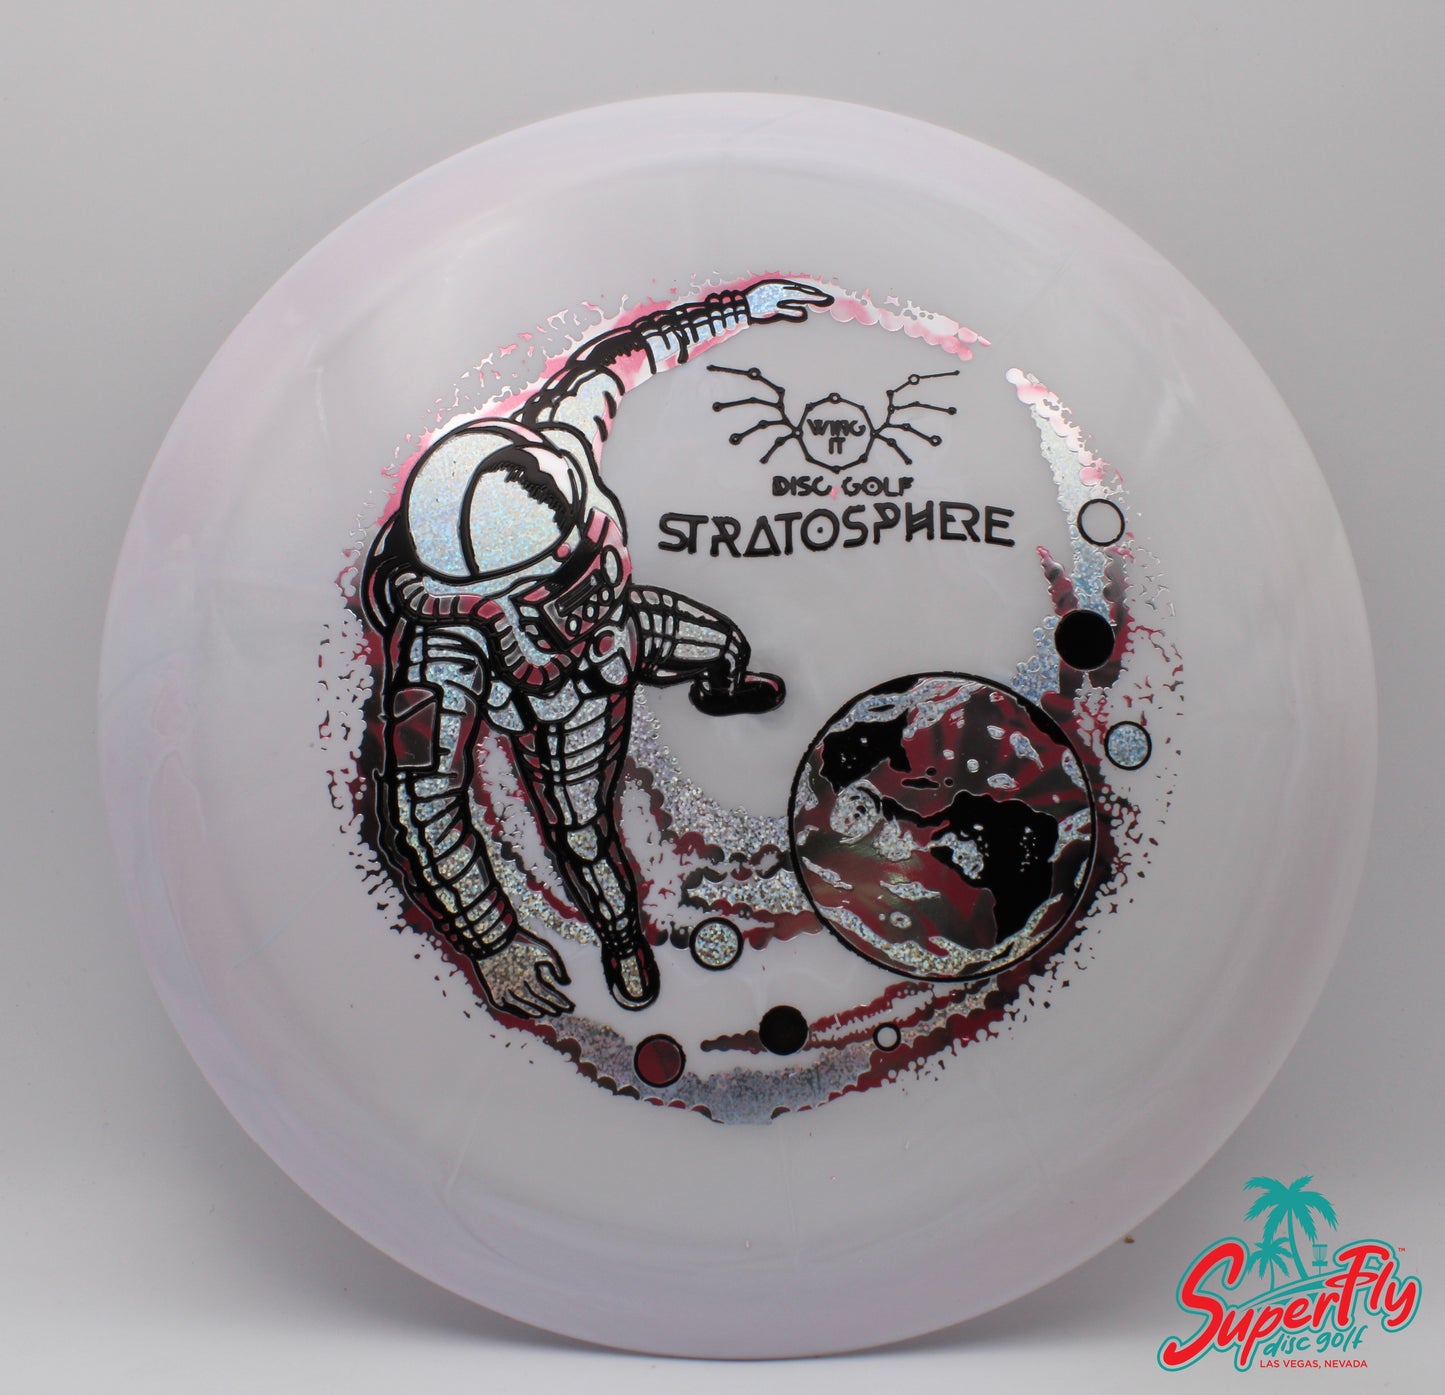 Wing It Disc Golf Stratosphere